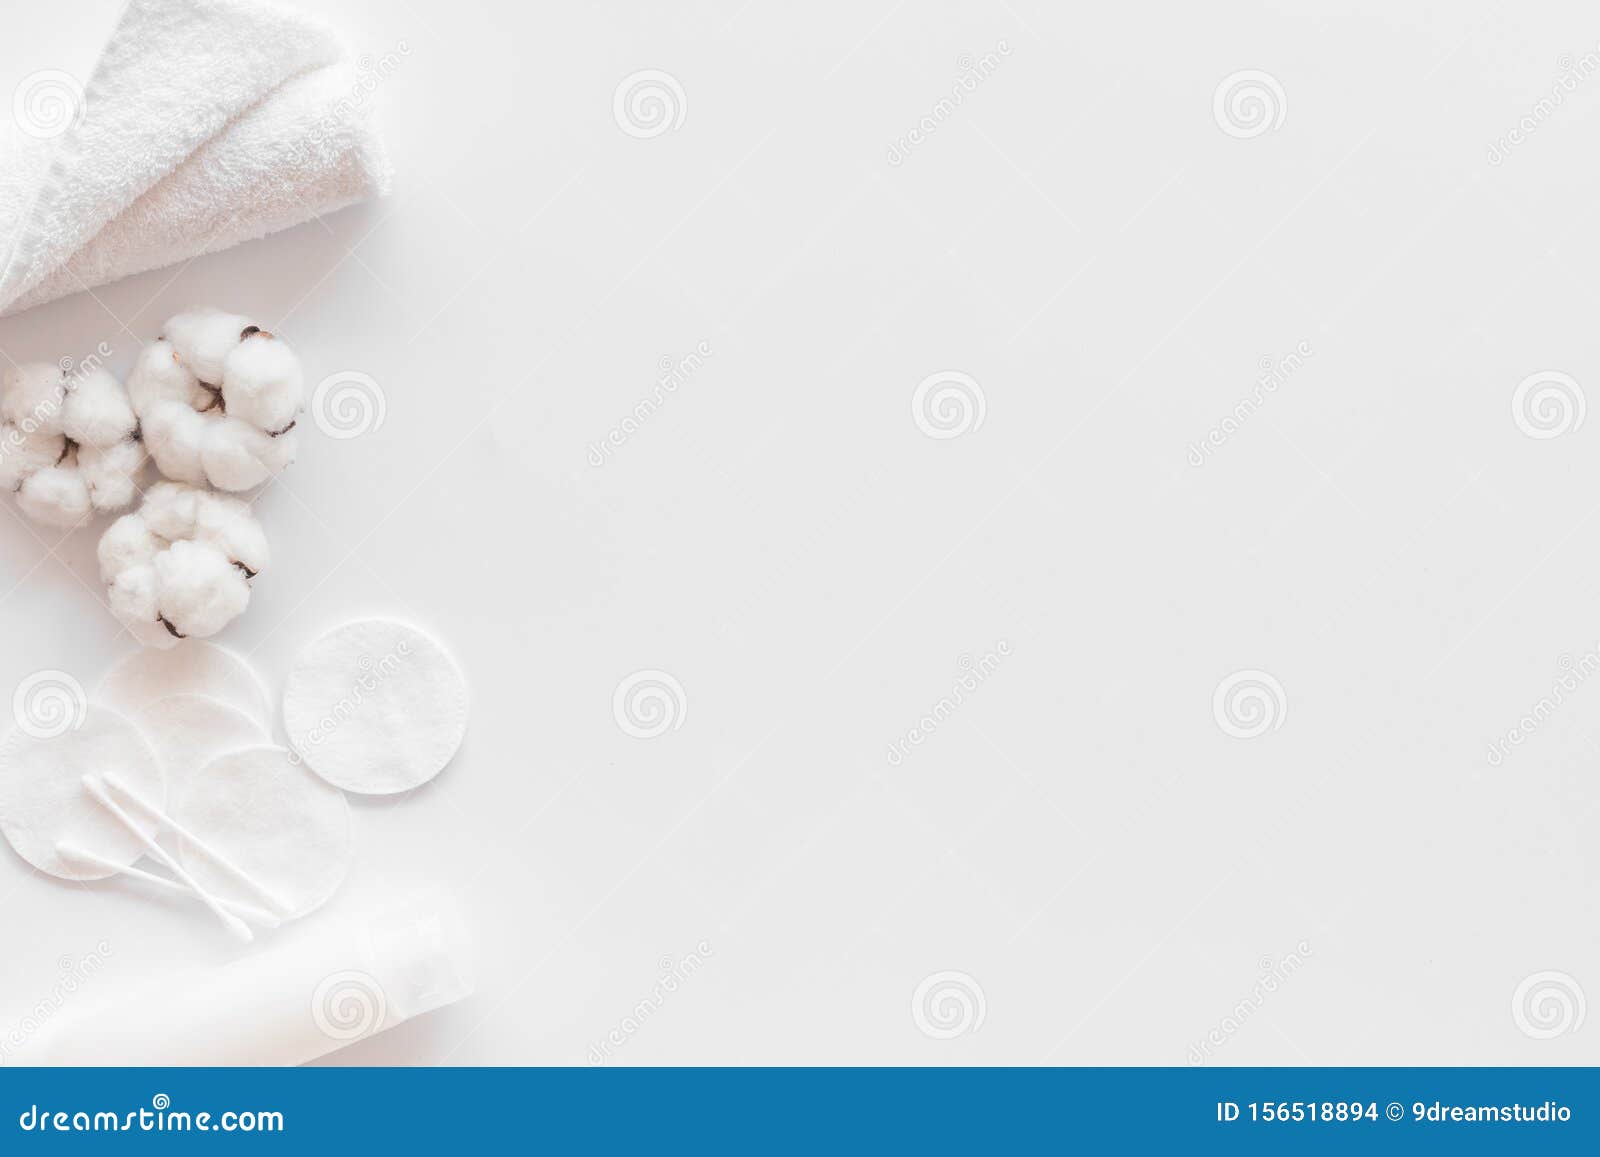 Download Hygiene Cotton Swabs, Pads And Cream For Pattern On White ...